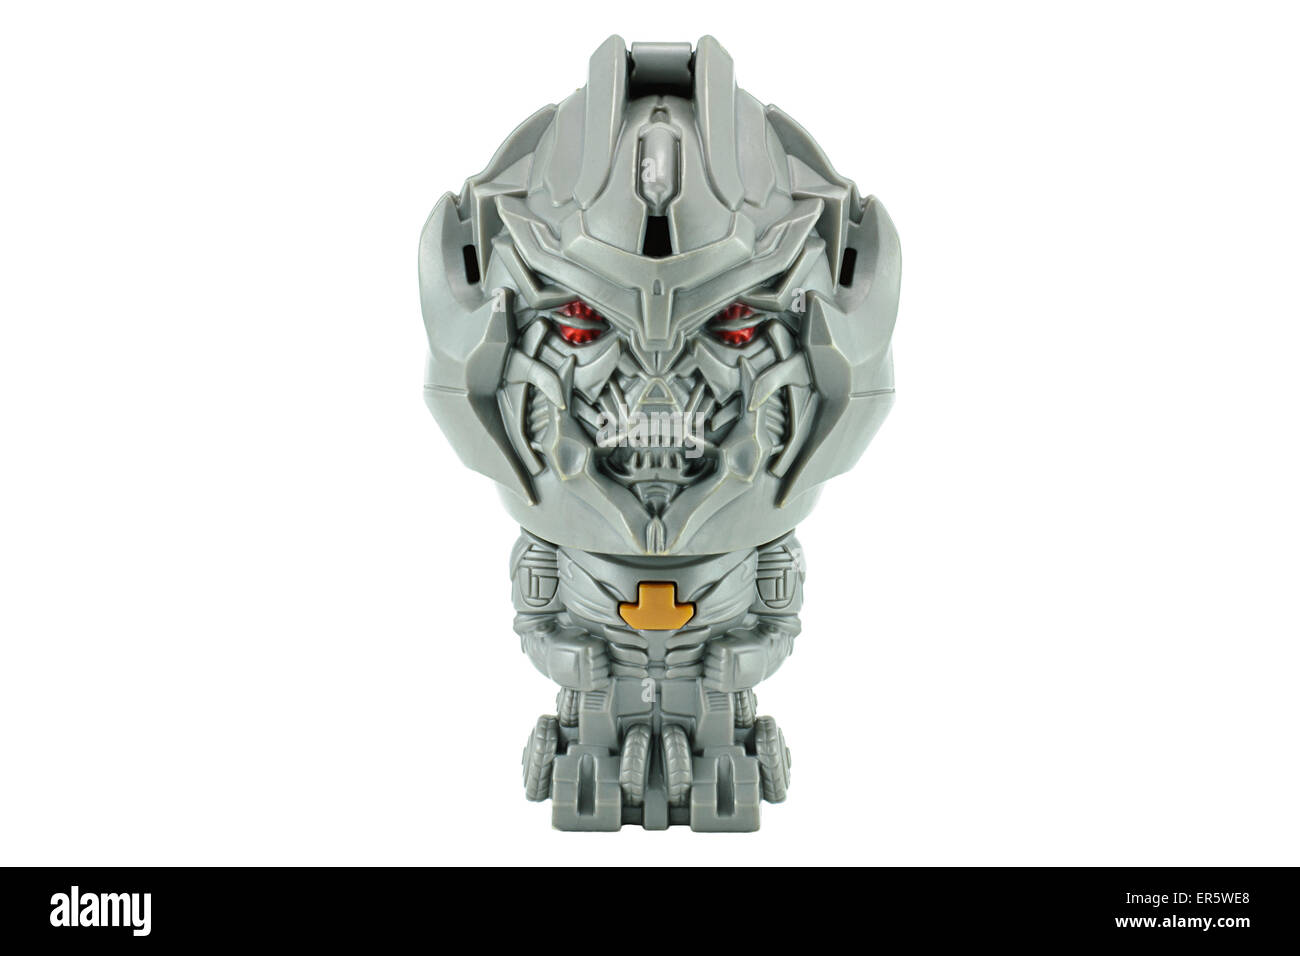 Bangkok, Thailand - January 11, 2015 : Megatron toy character from TRANSFORMERS Movie series. There are toy sold as part of Burg Stock Photo